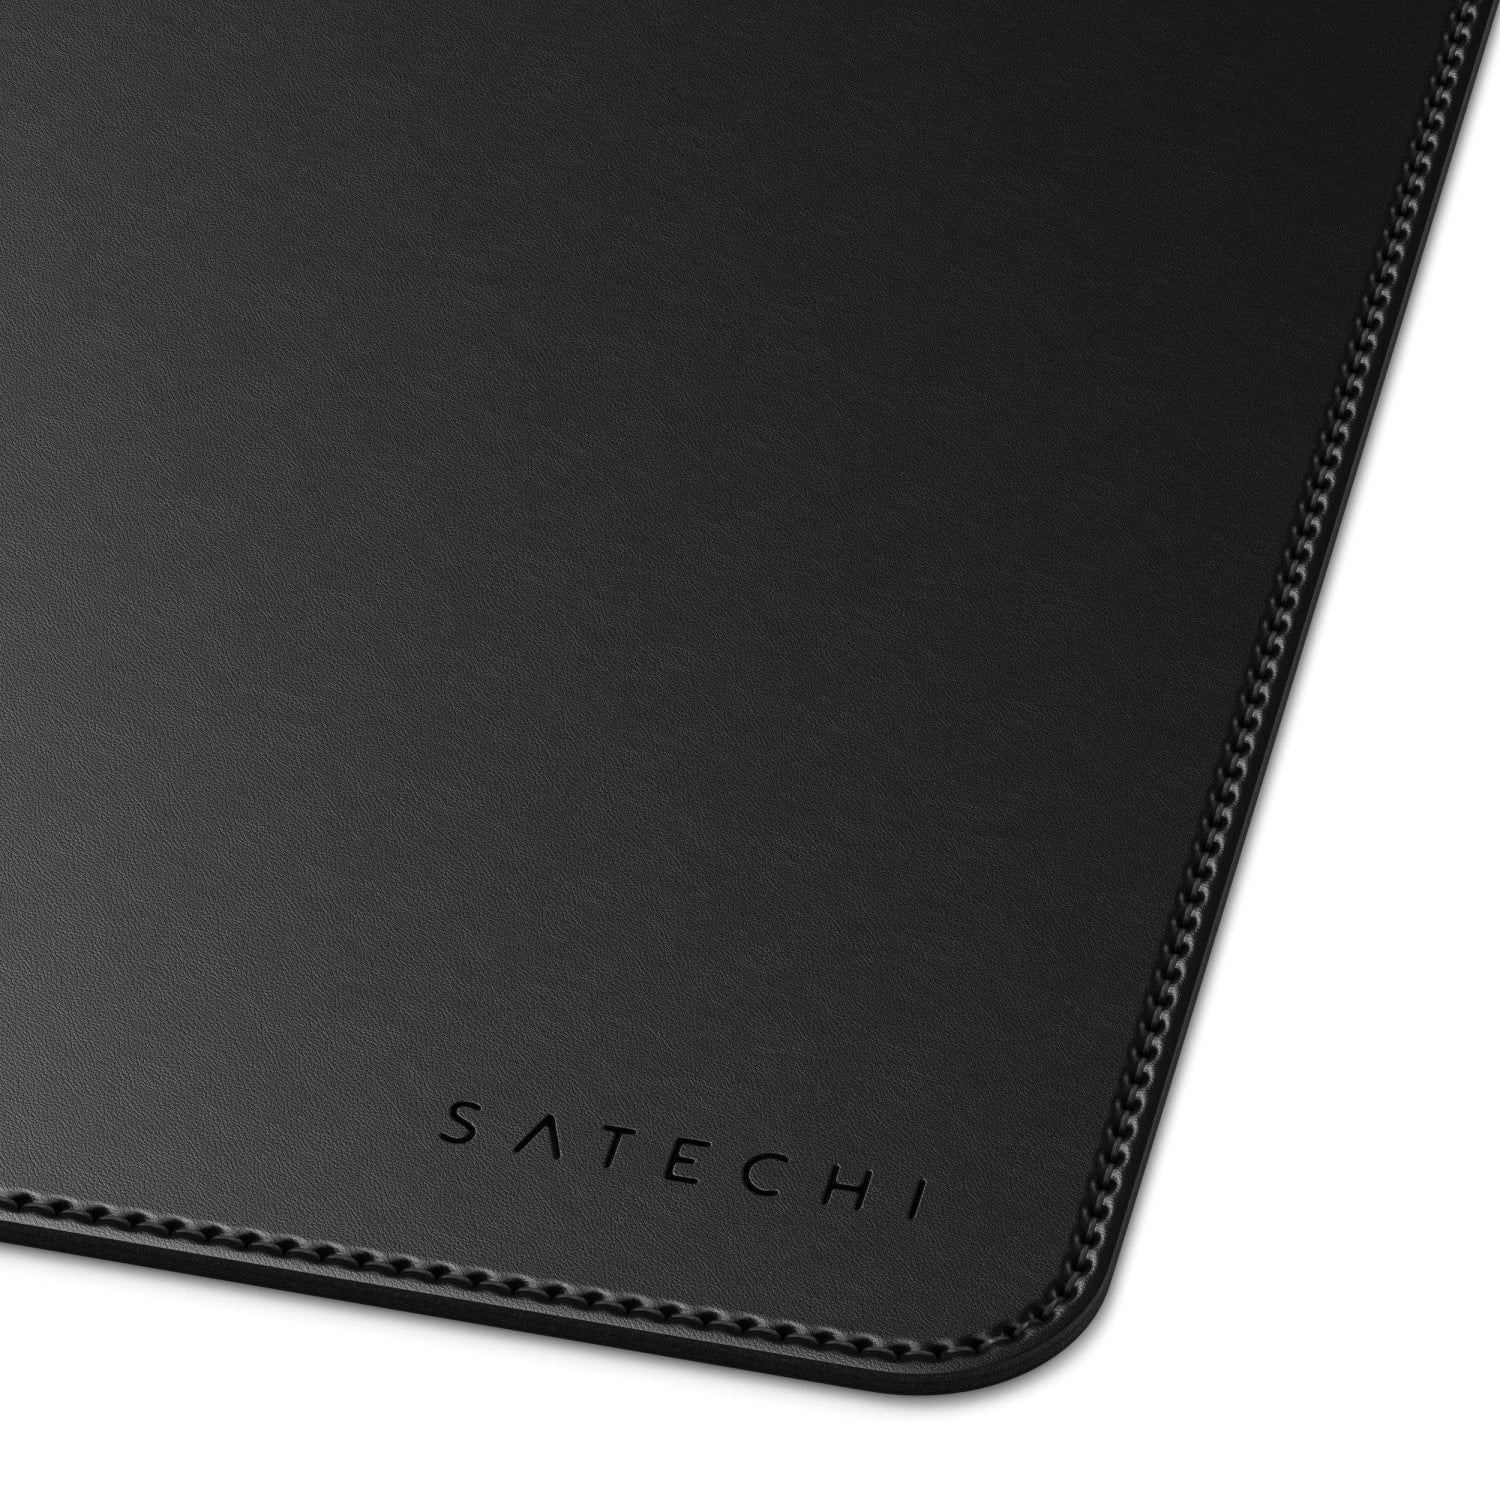 eco-leather-deskmate-other-satechi-874492.jpg